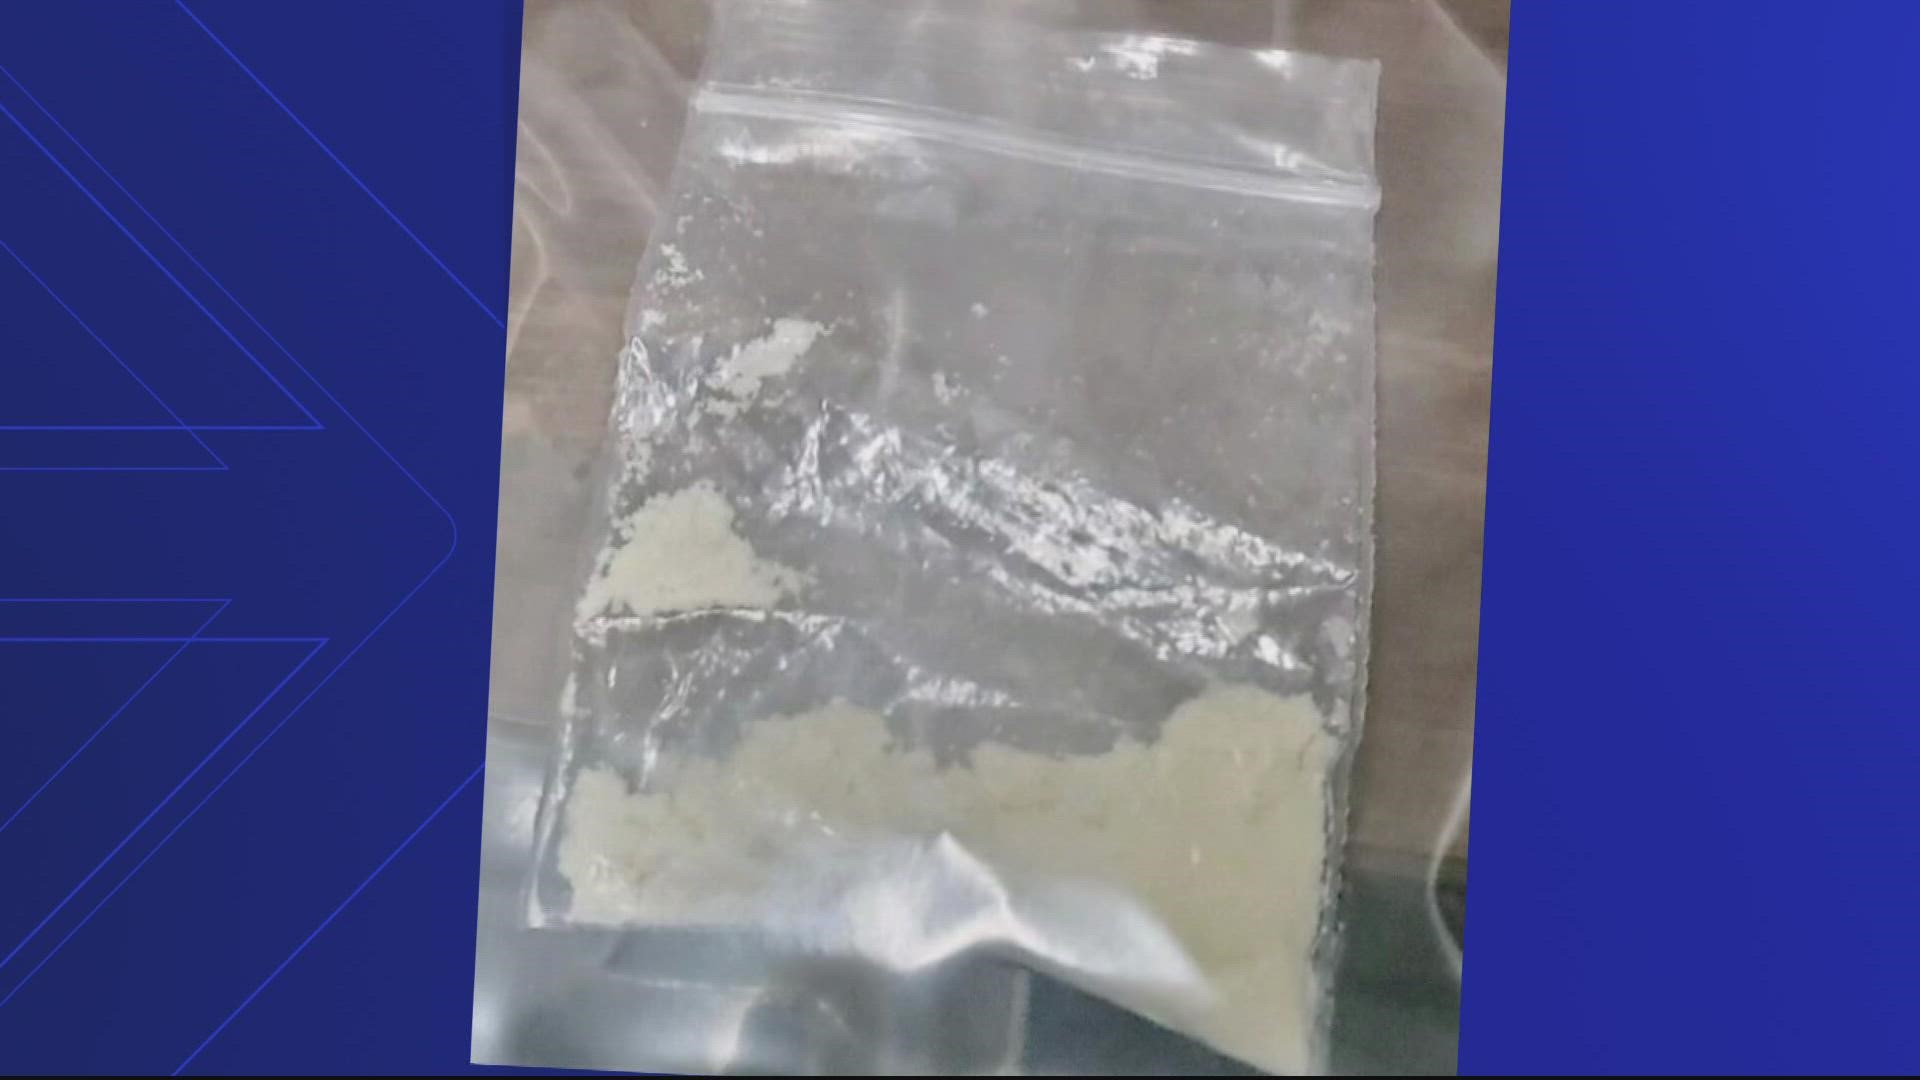 A student in Charles County, Maryland found a bag in a classroom containing a substance that tested positive for morphine, the sheriff's office says.